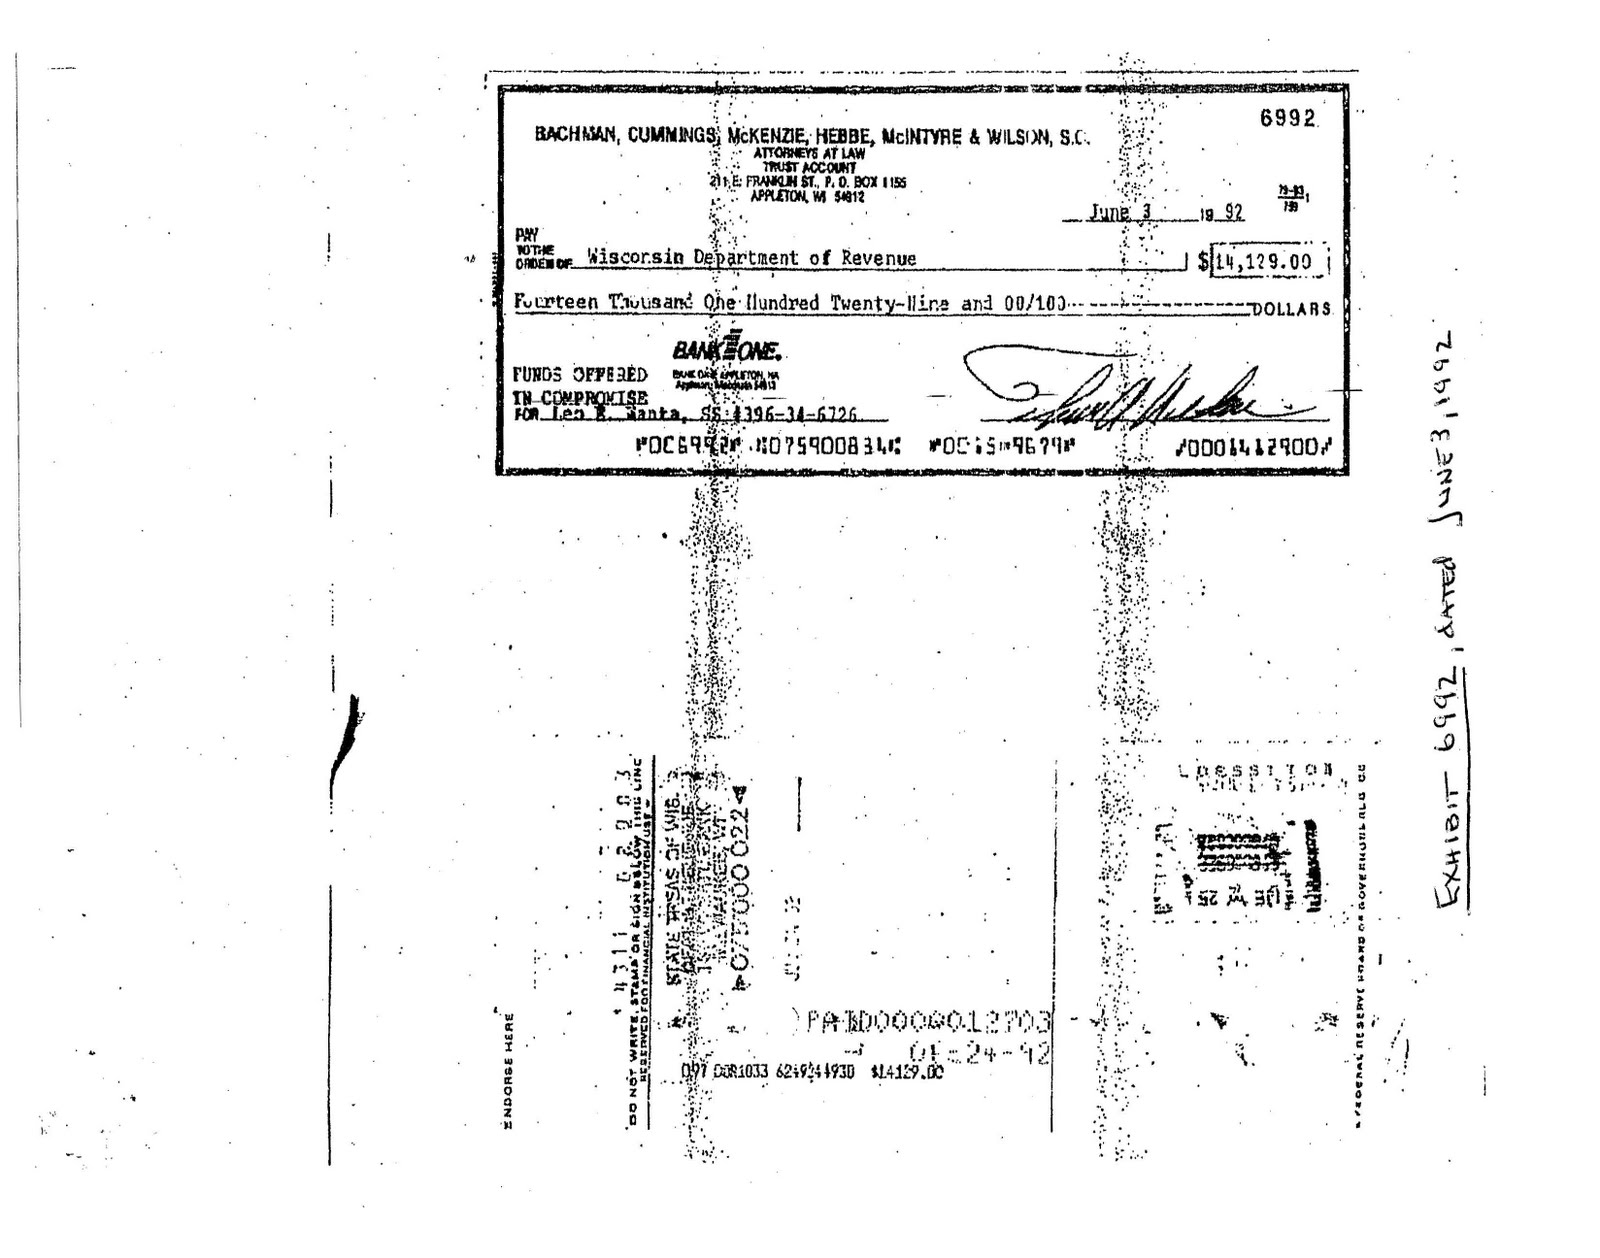 copy of cancelled check bank of america